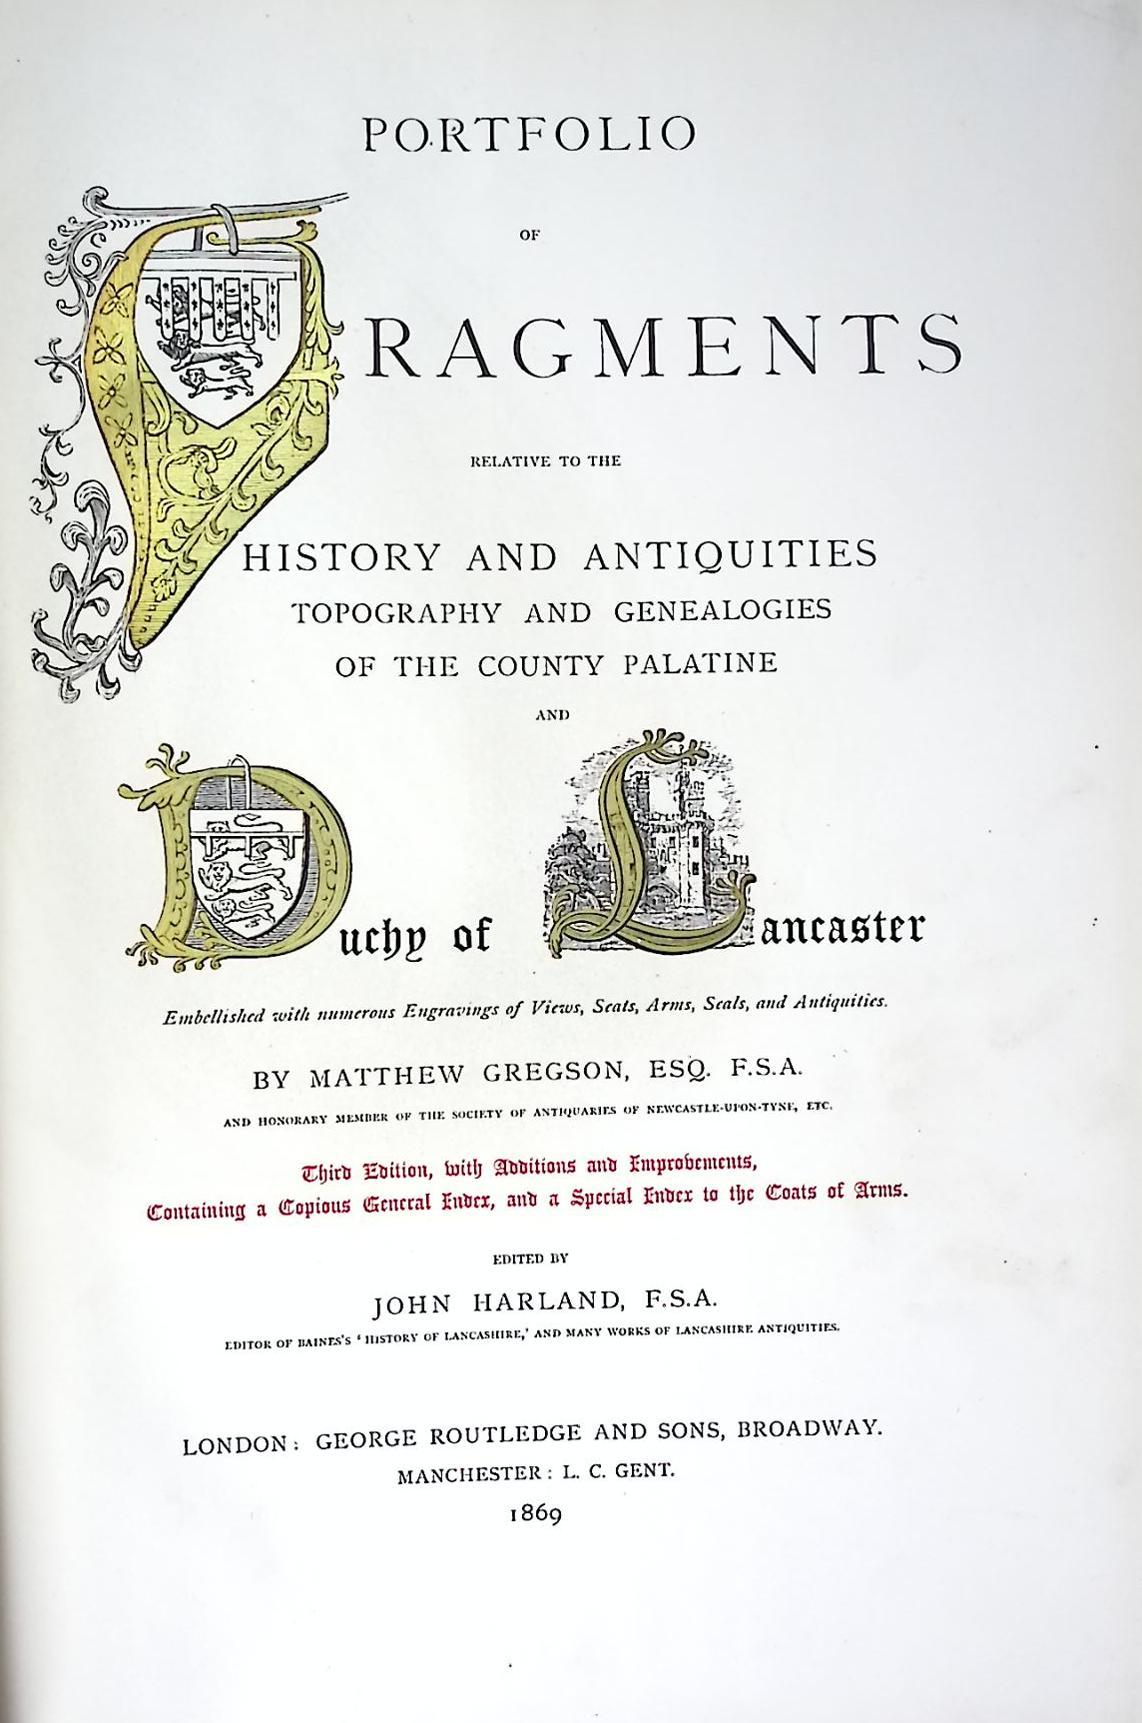 Portfolio of Fragments Relative to the History and Antiquities, Topography and Genealogies of the County Palatine and Duchy of Lancaster